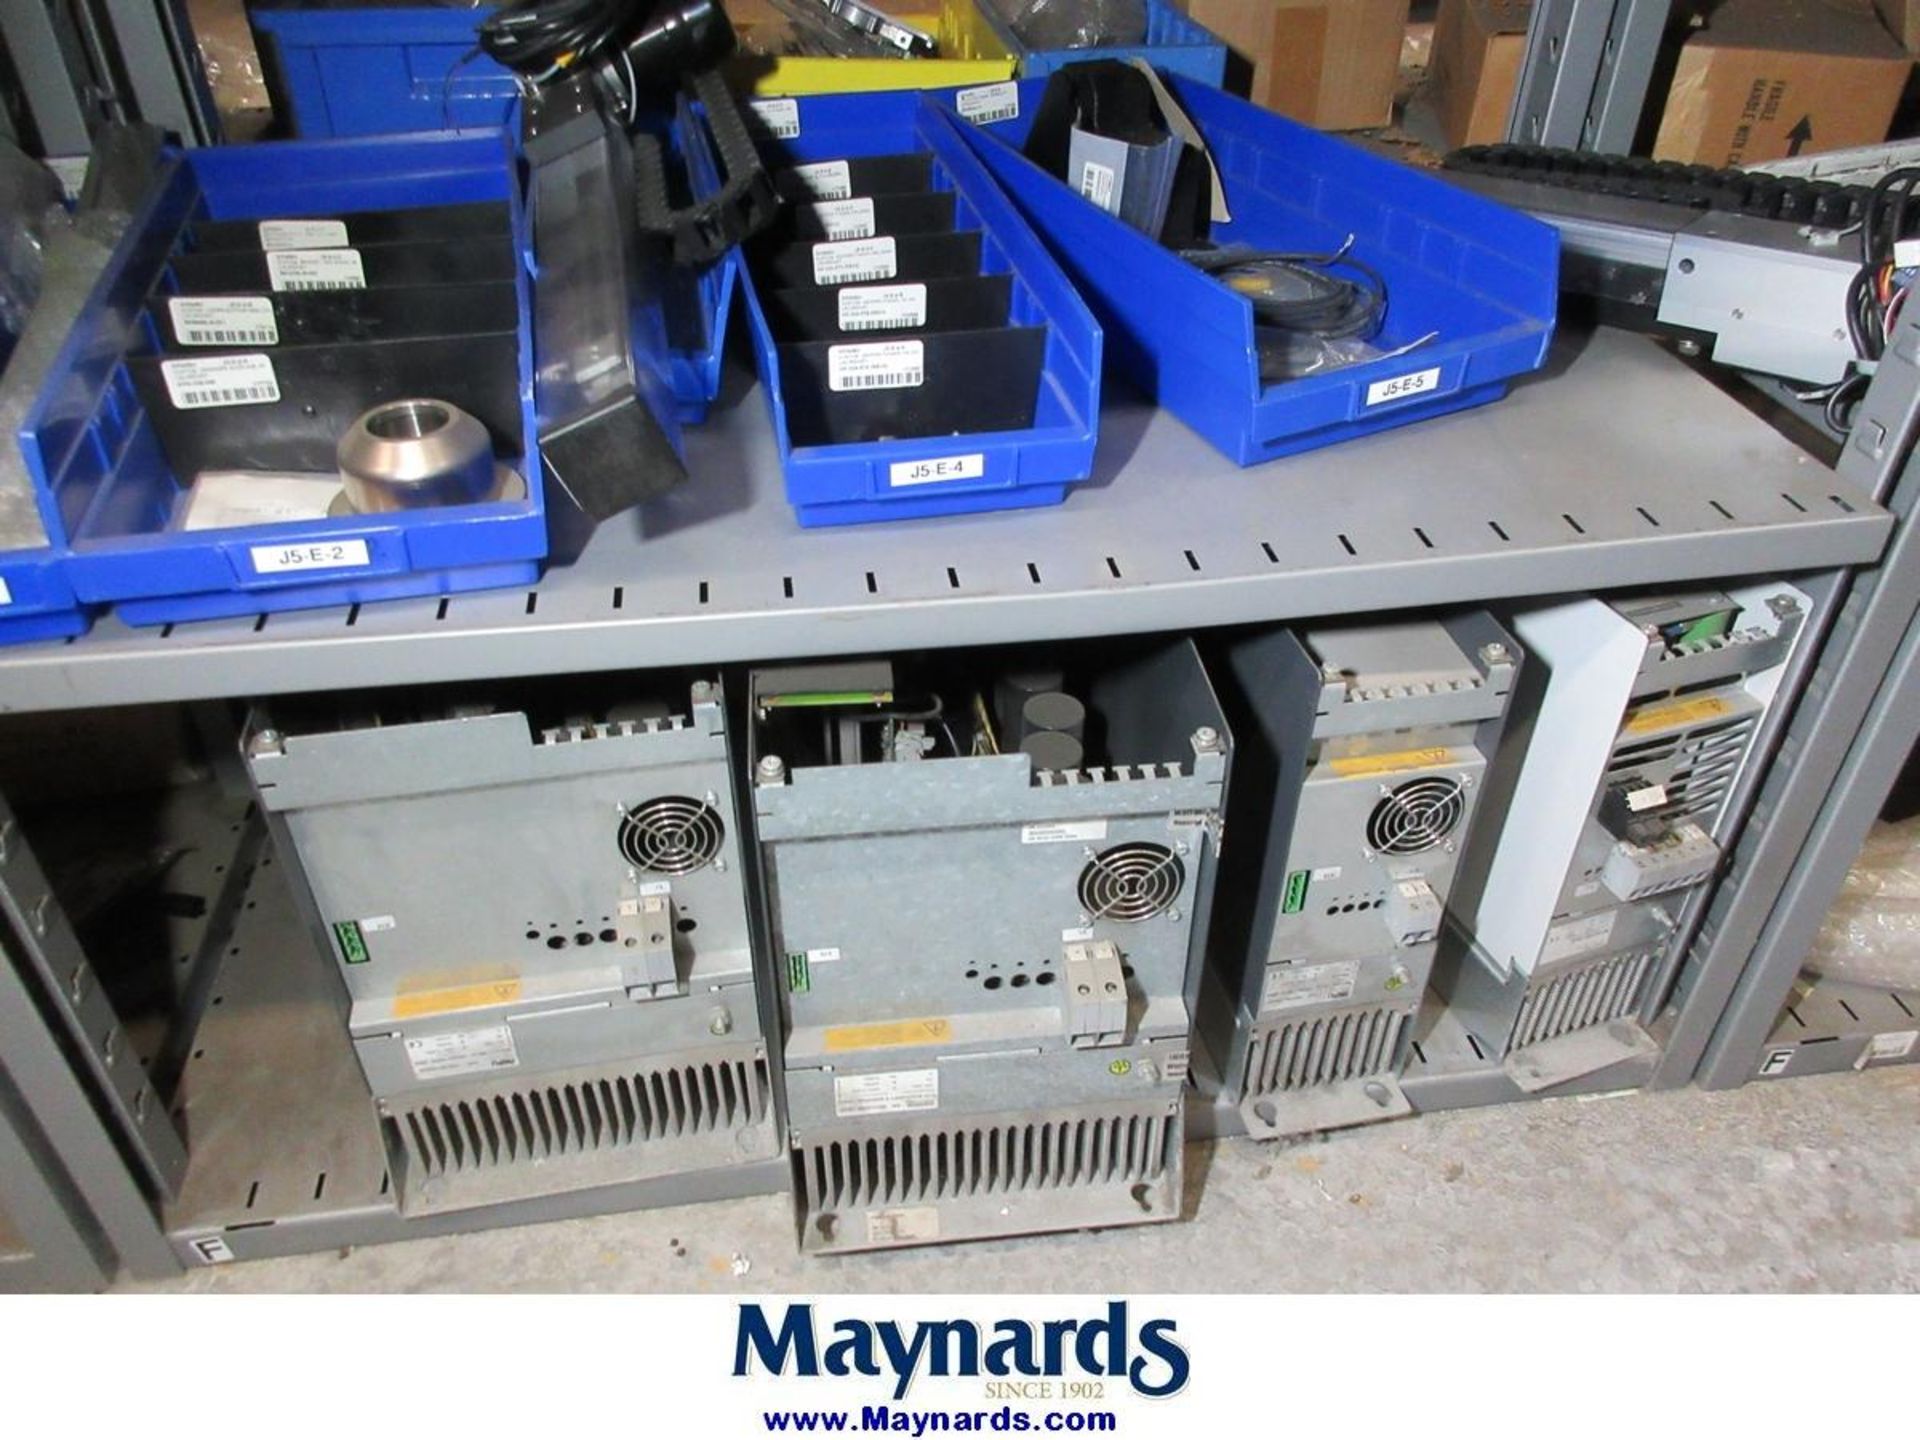 Large Lot of Electrical Controls, PLC's, Drives & Remaining Contents of Maint. Parts Crib - Image 29 of 107